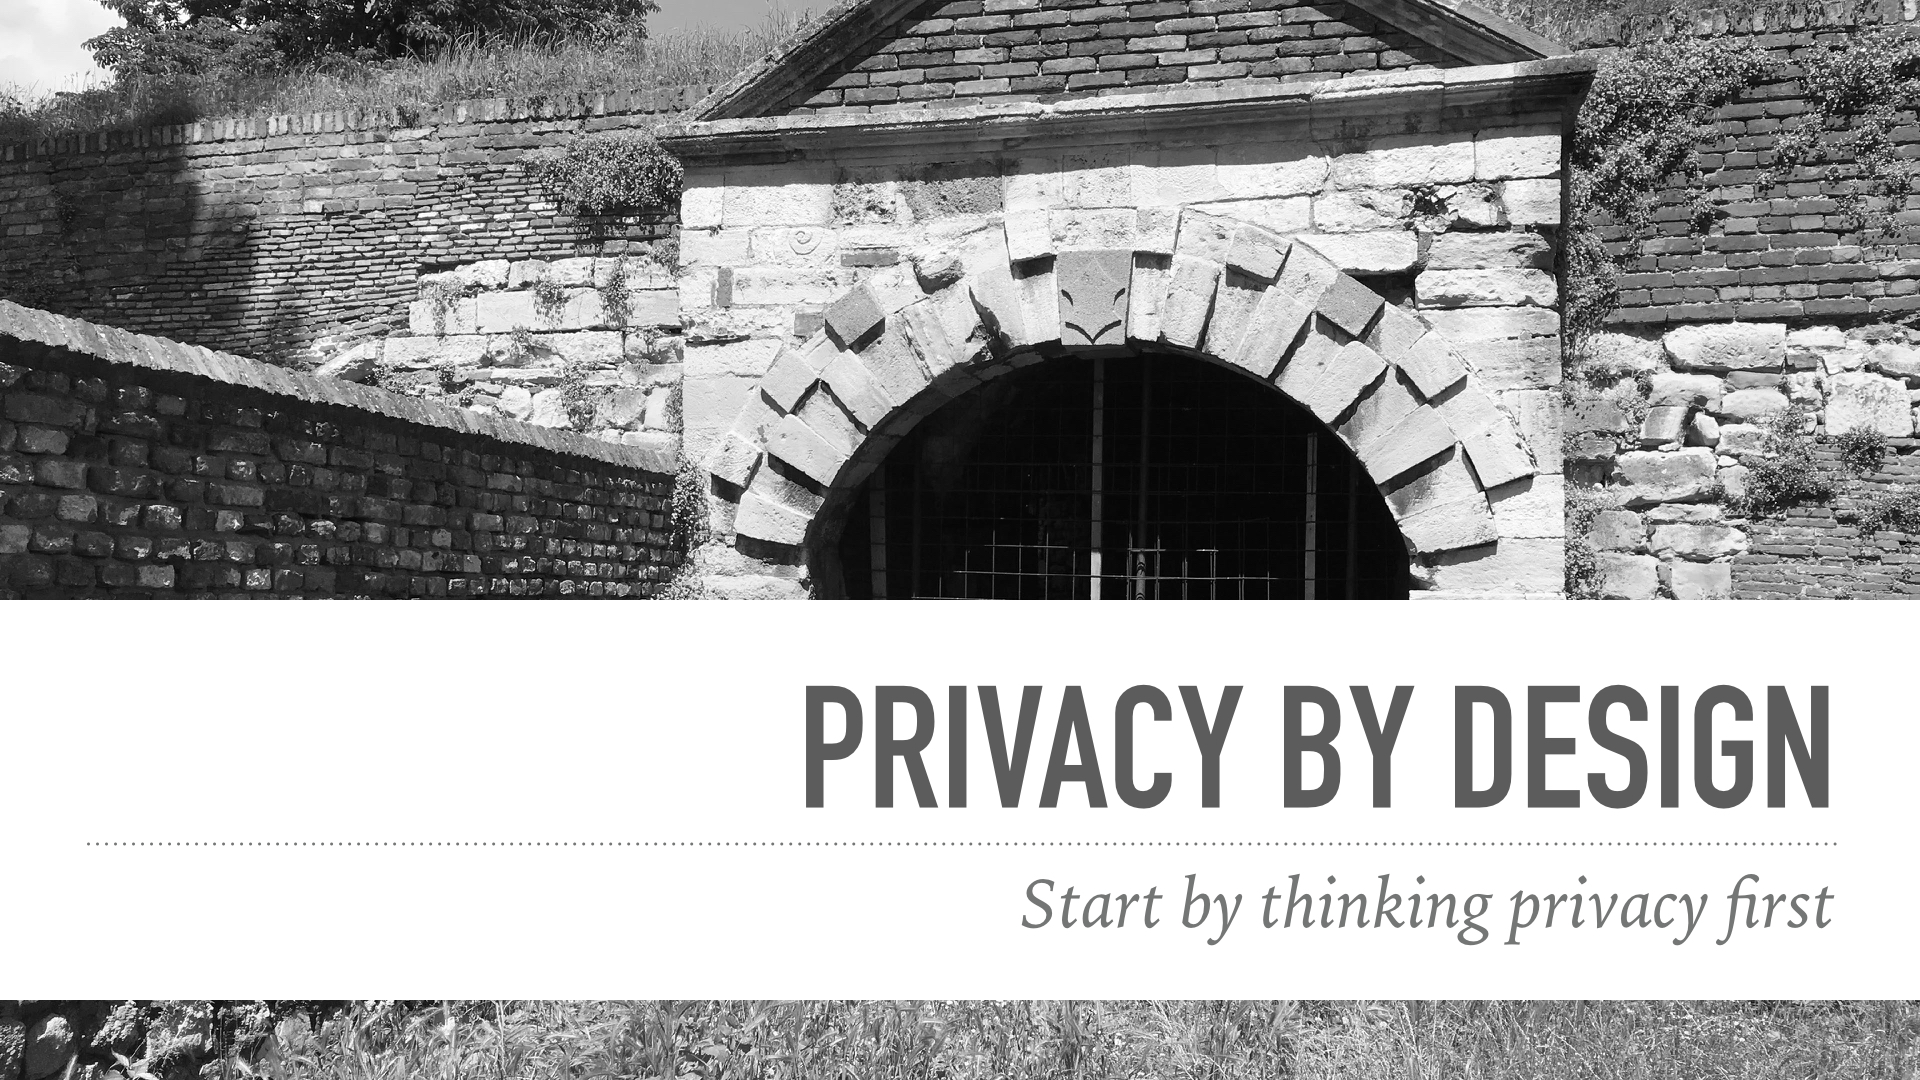 Privacy by design